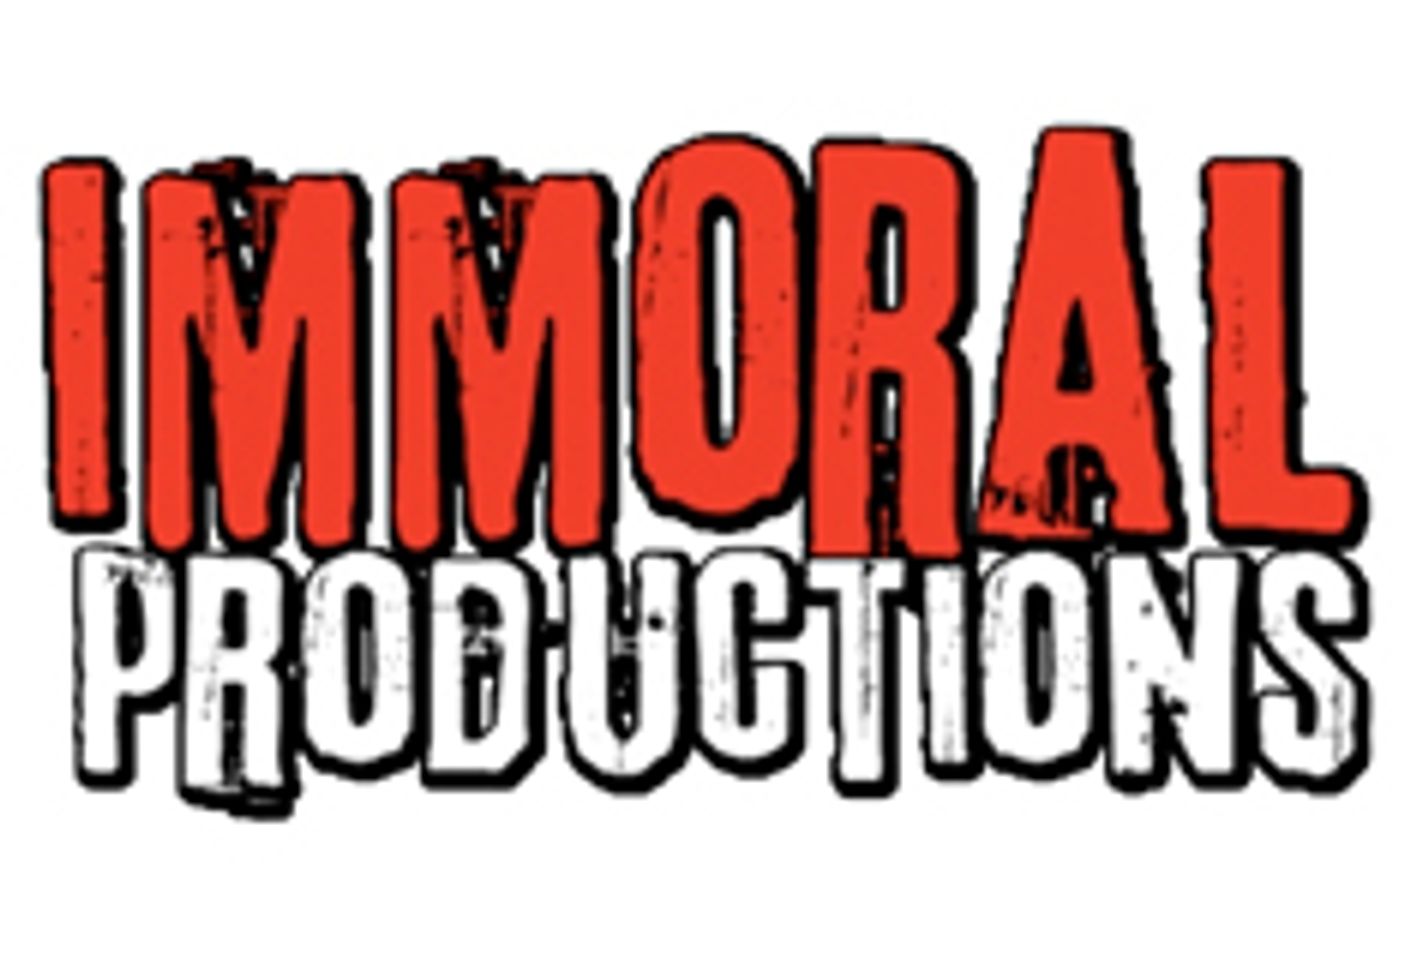 Immoral Productions Introduces 'Sexy Senoritas 11' August 14